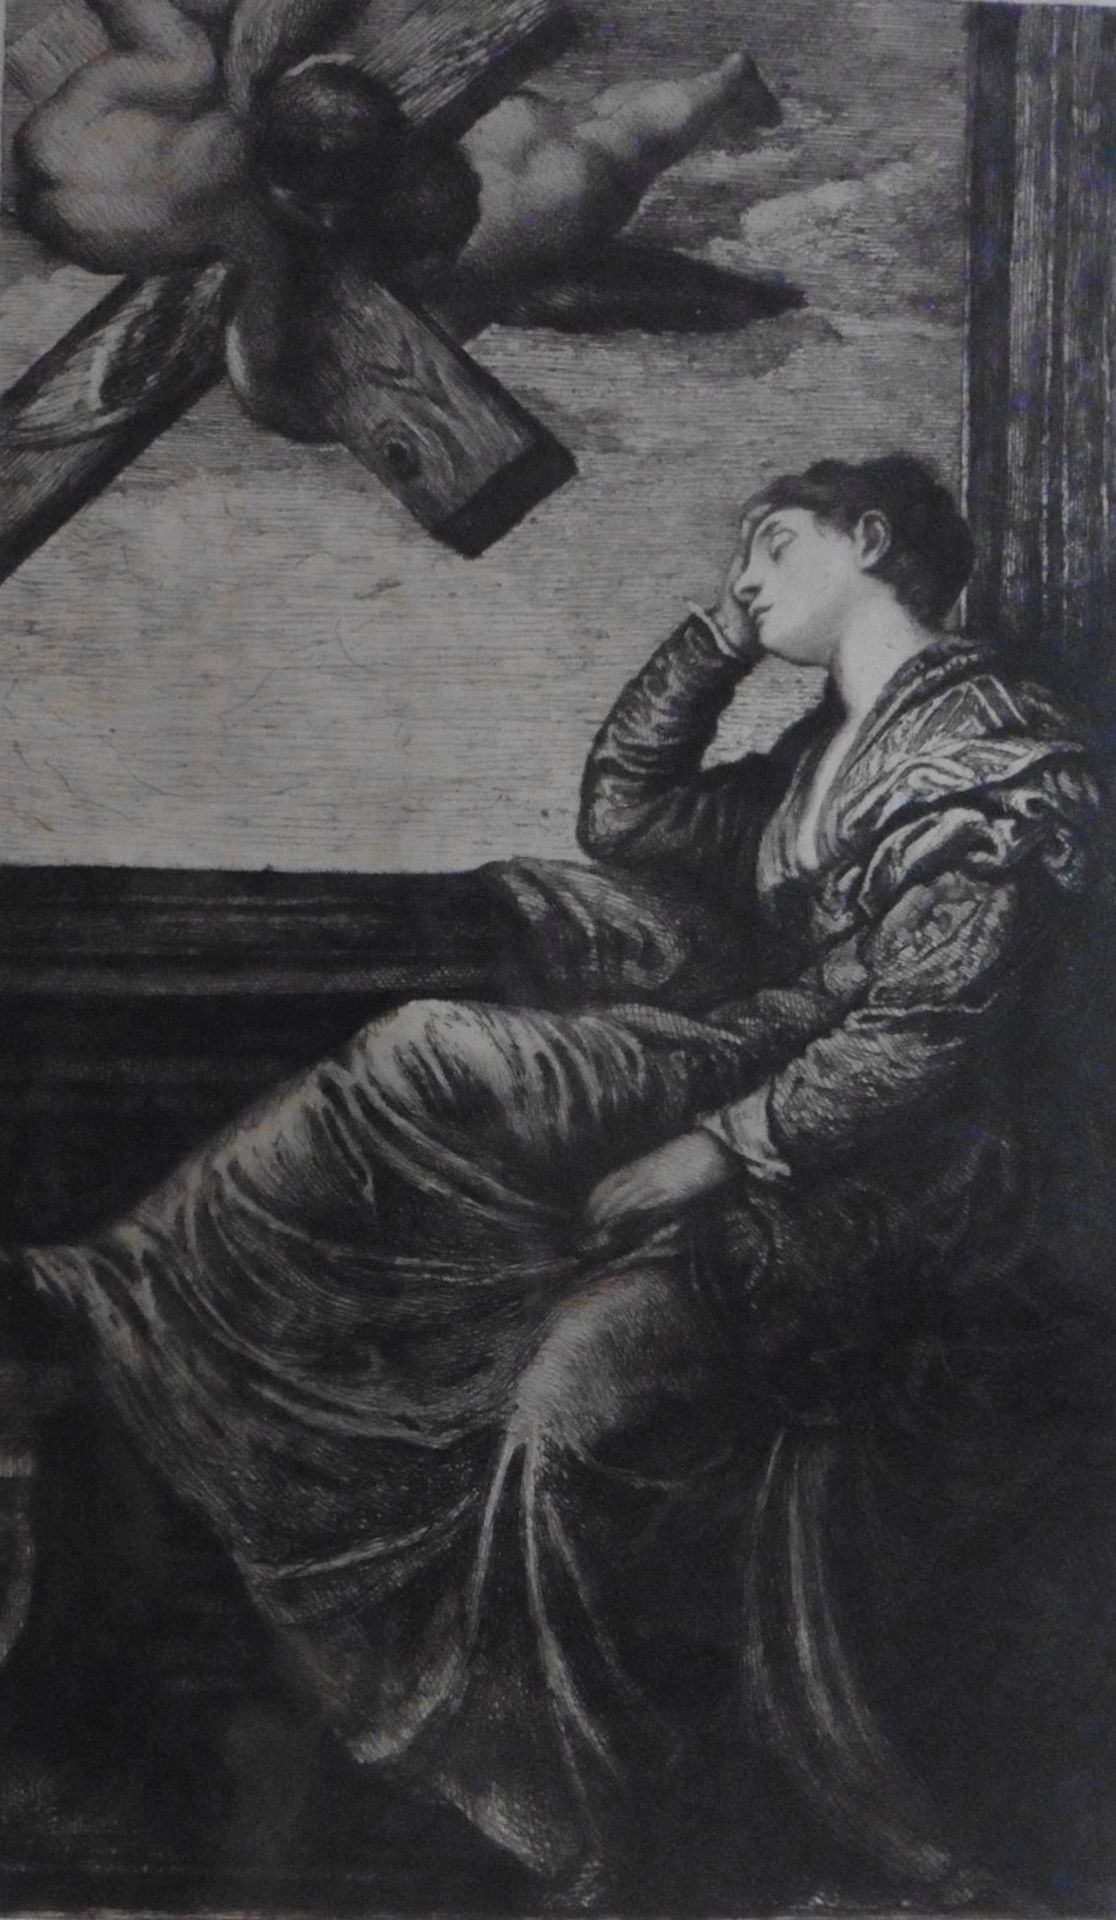 Unsigned engraving circa 1900 “Thoughts”